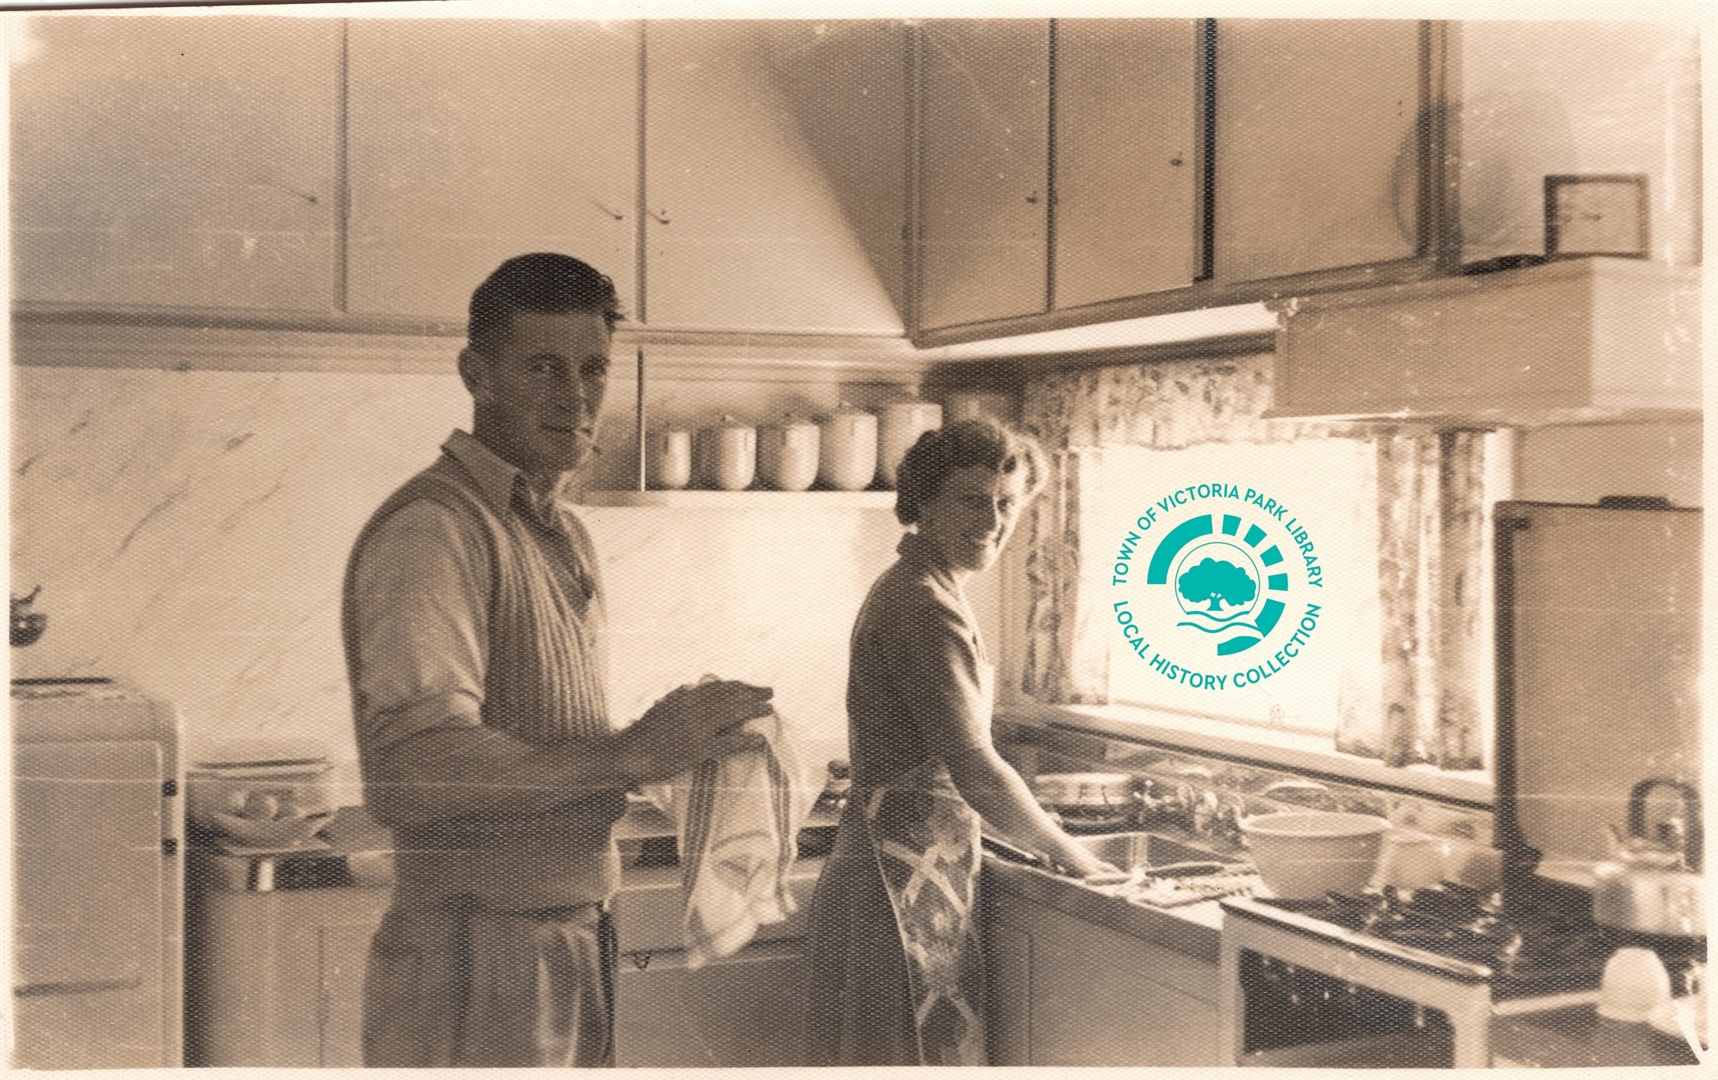 PH00043-11 Ken & Irene Stewart doing dishes 107 Westminster St, May 1953 Image